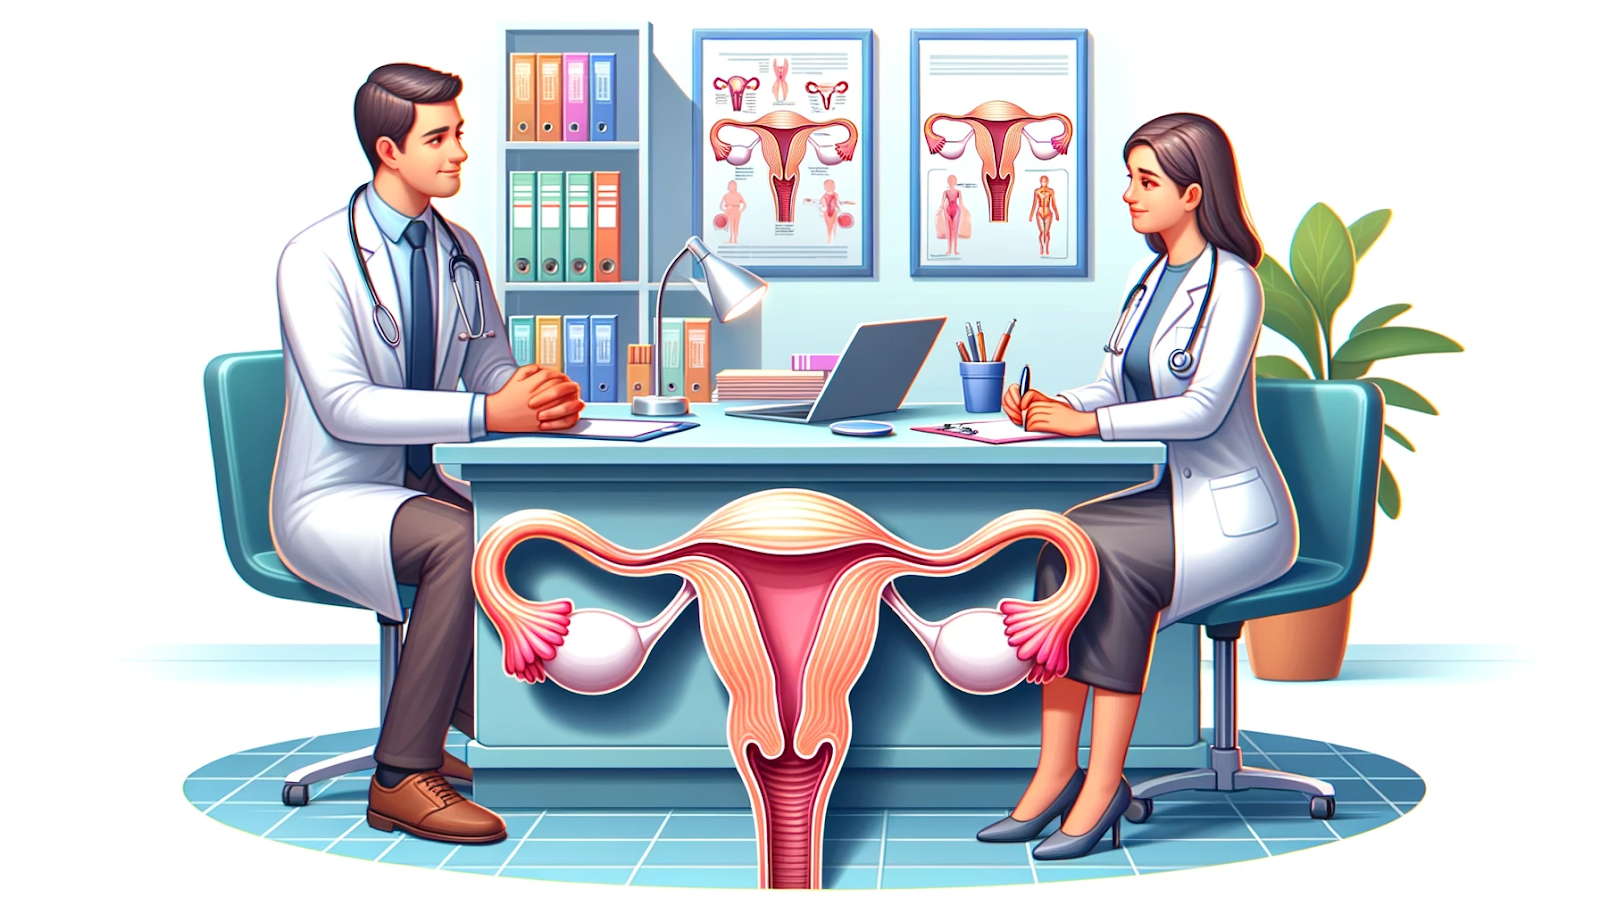 Treatment Options for Arcuate Uterus Before or During Pregnancy